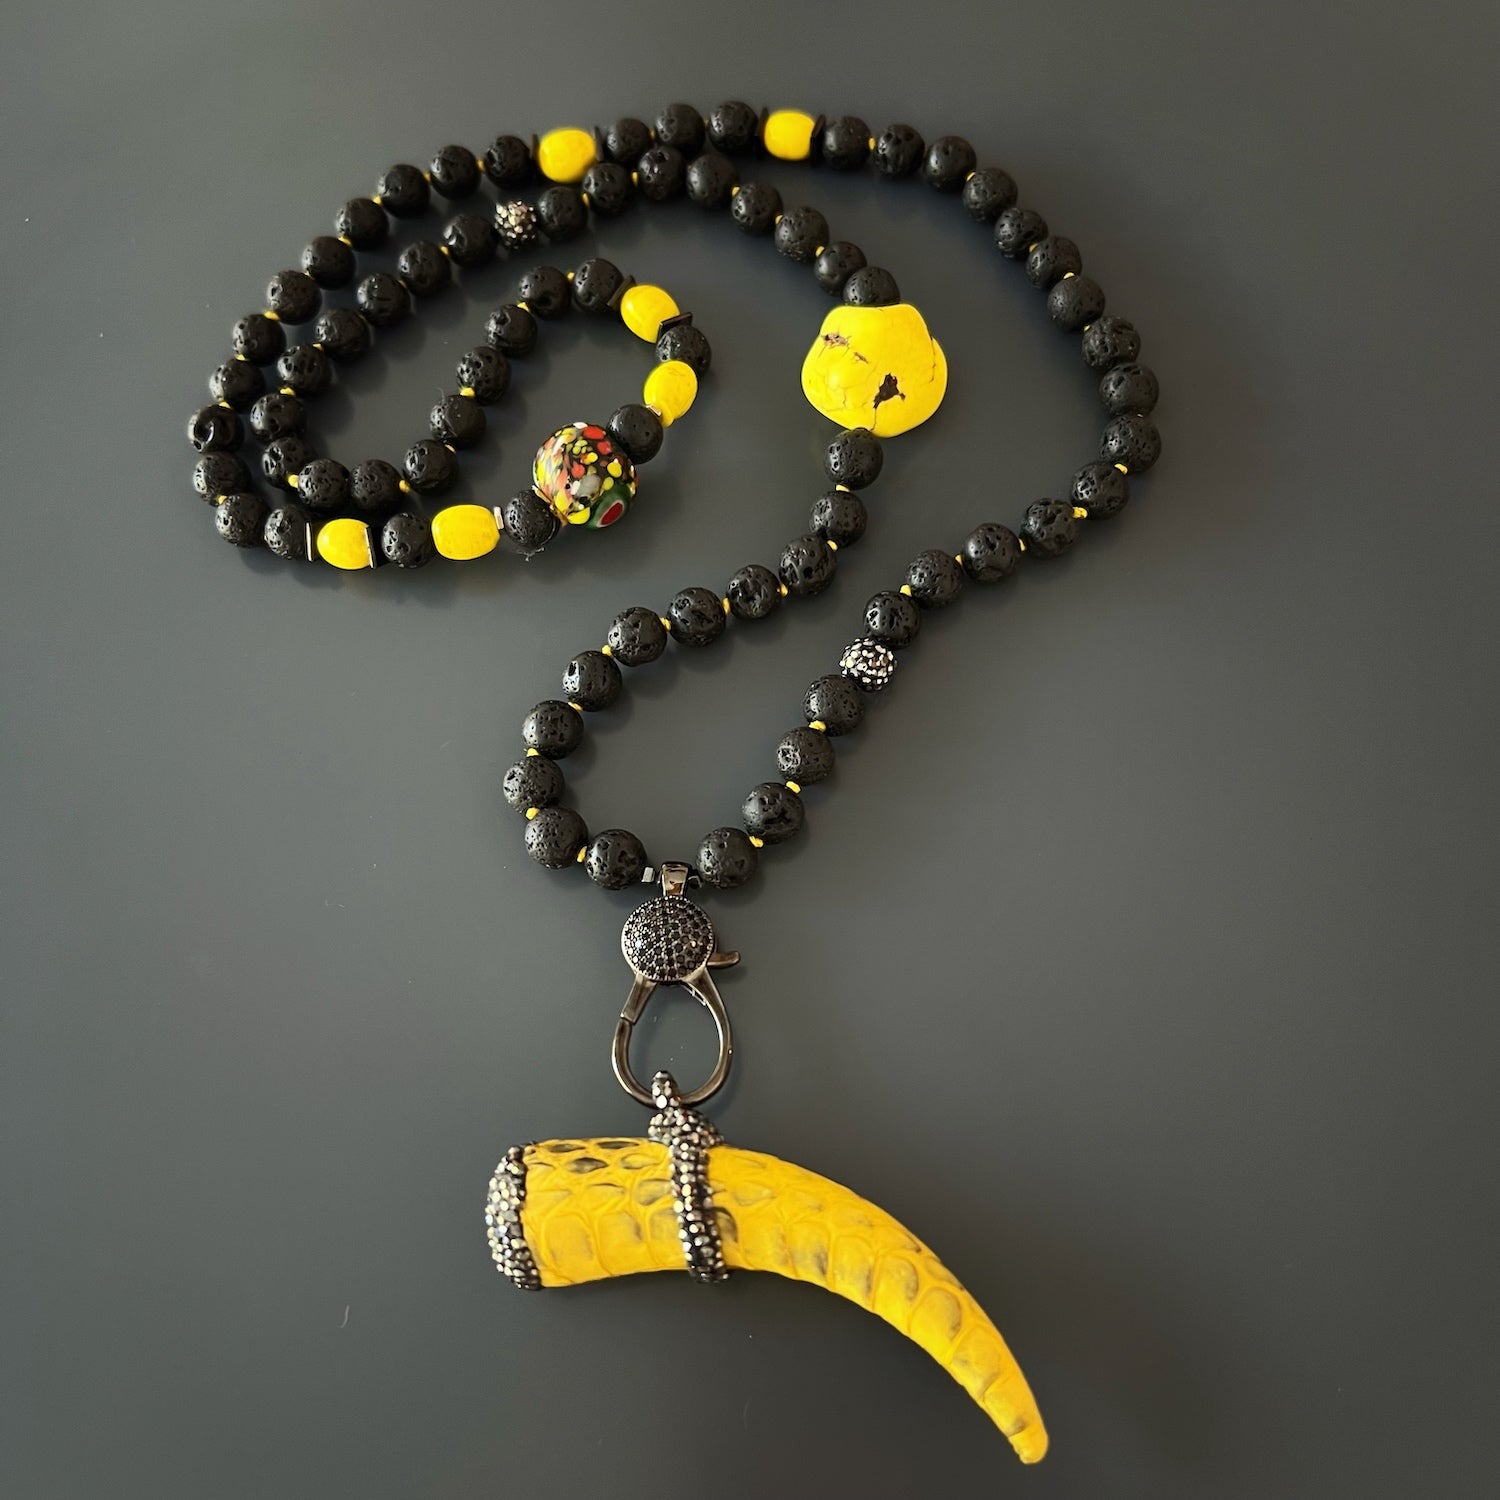 Combination of lava rock stones, zircon beads, and Nepal yellow beads, creating a harmonious and meaningful design in the Spirit Cornicello Unique Necklace.